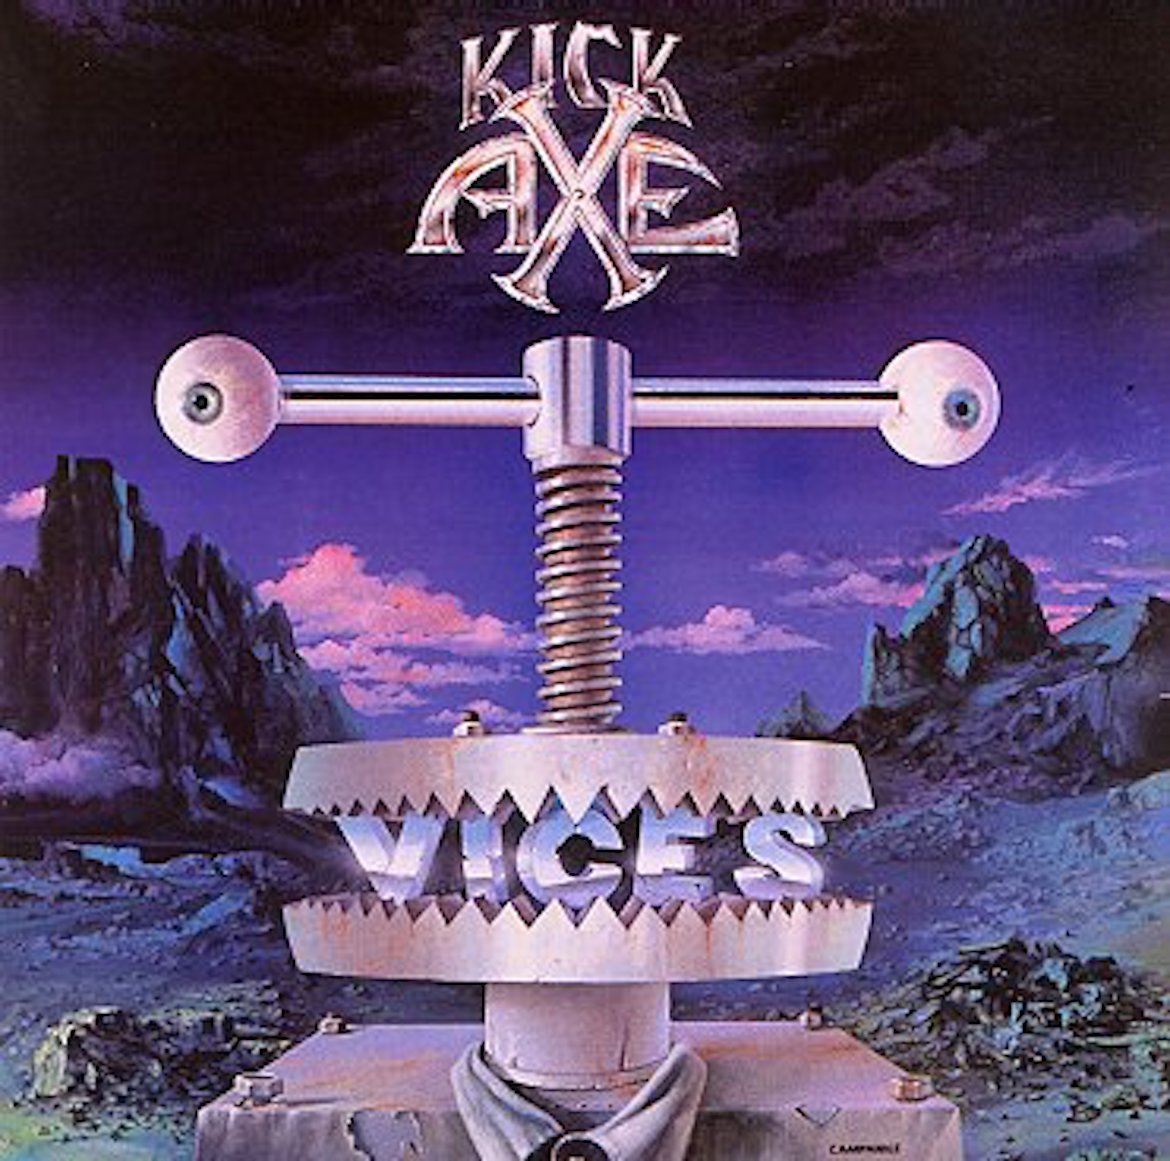 Vices album cover from Kick Axe